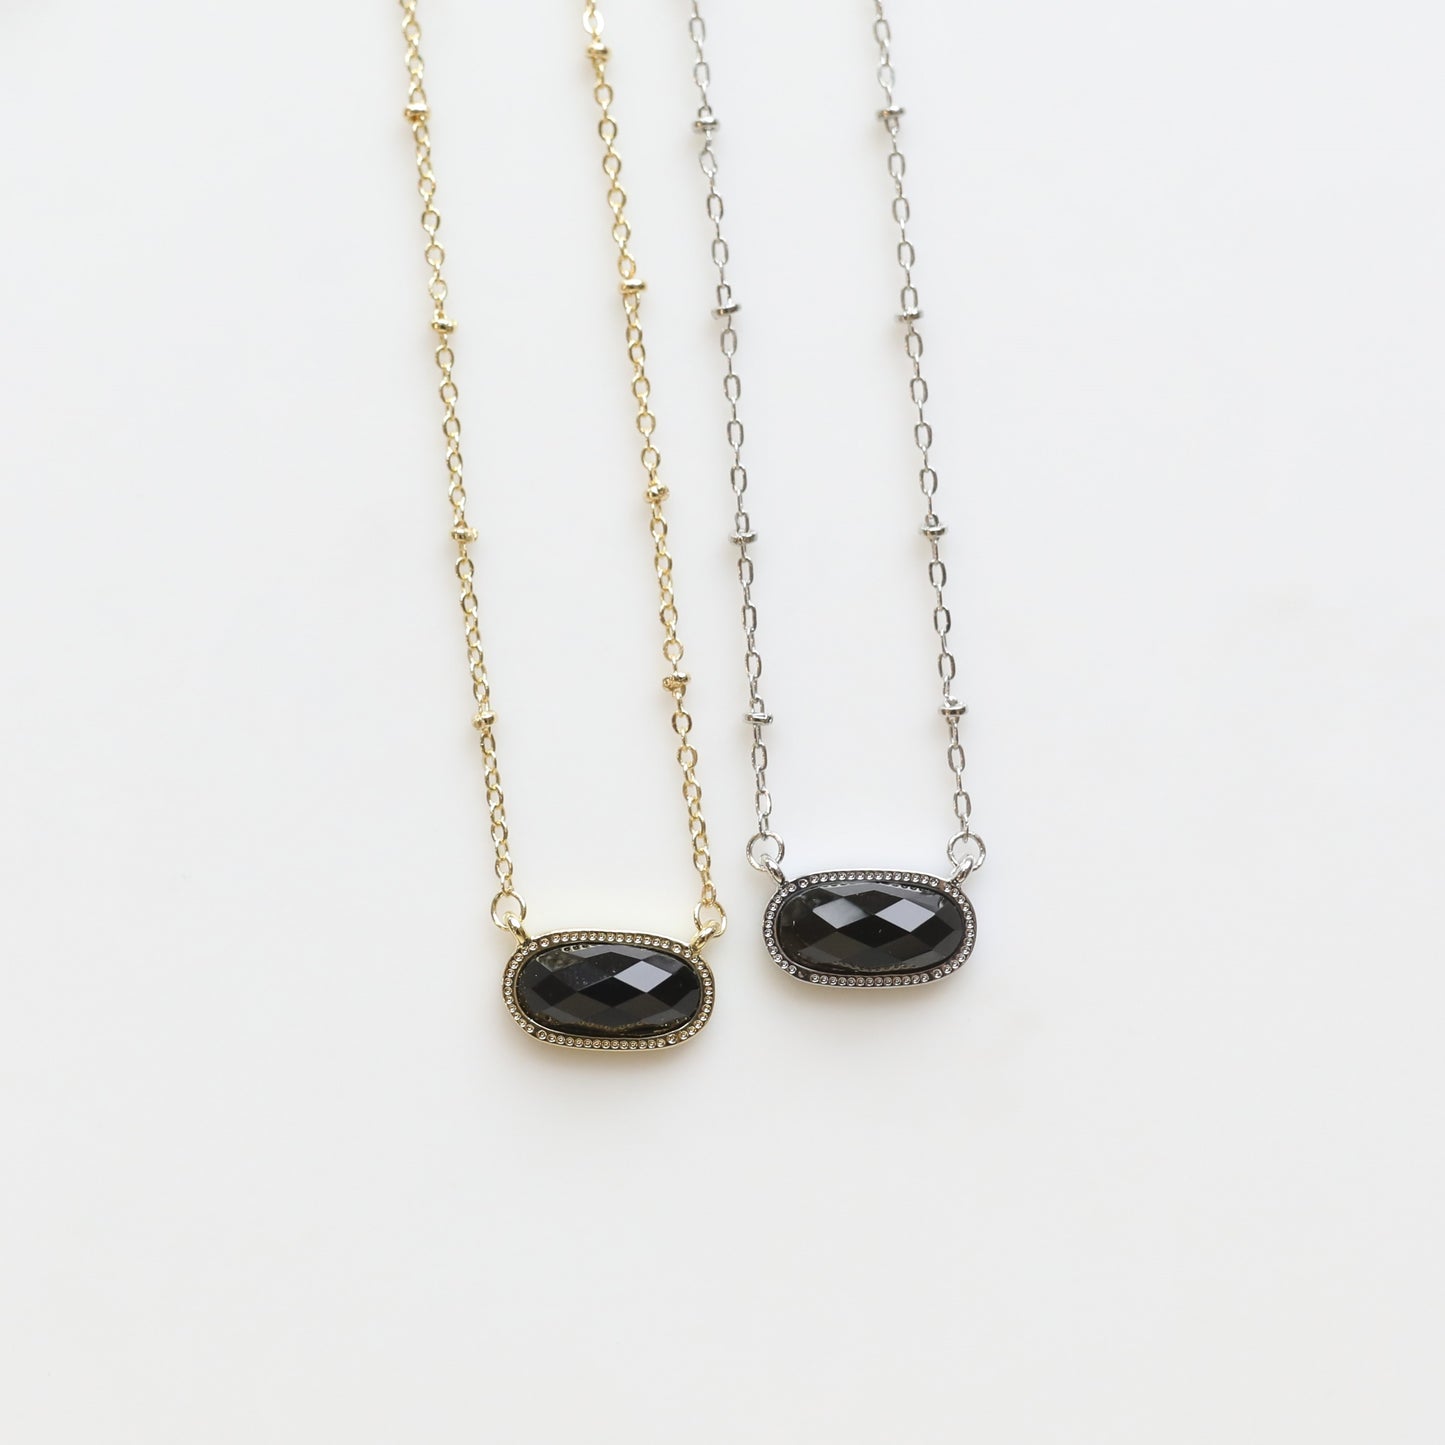 Meaningful Gemstone Necklace in Onyx available with a Gold or Silver chain